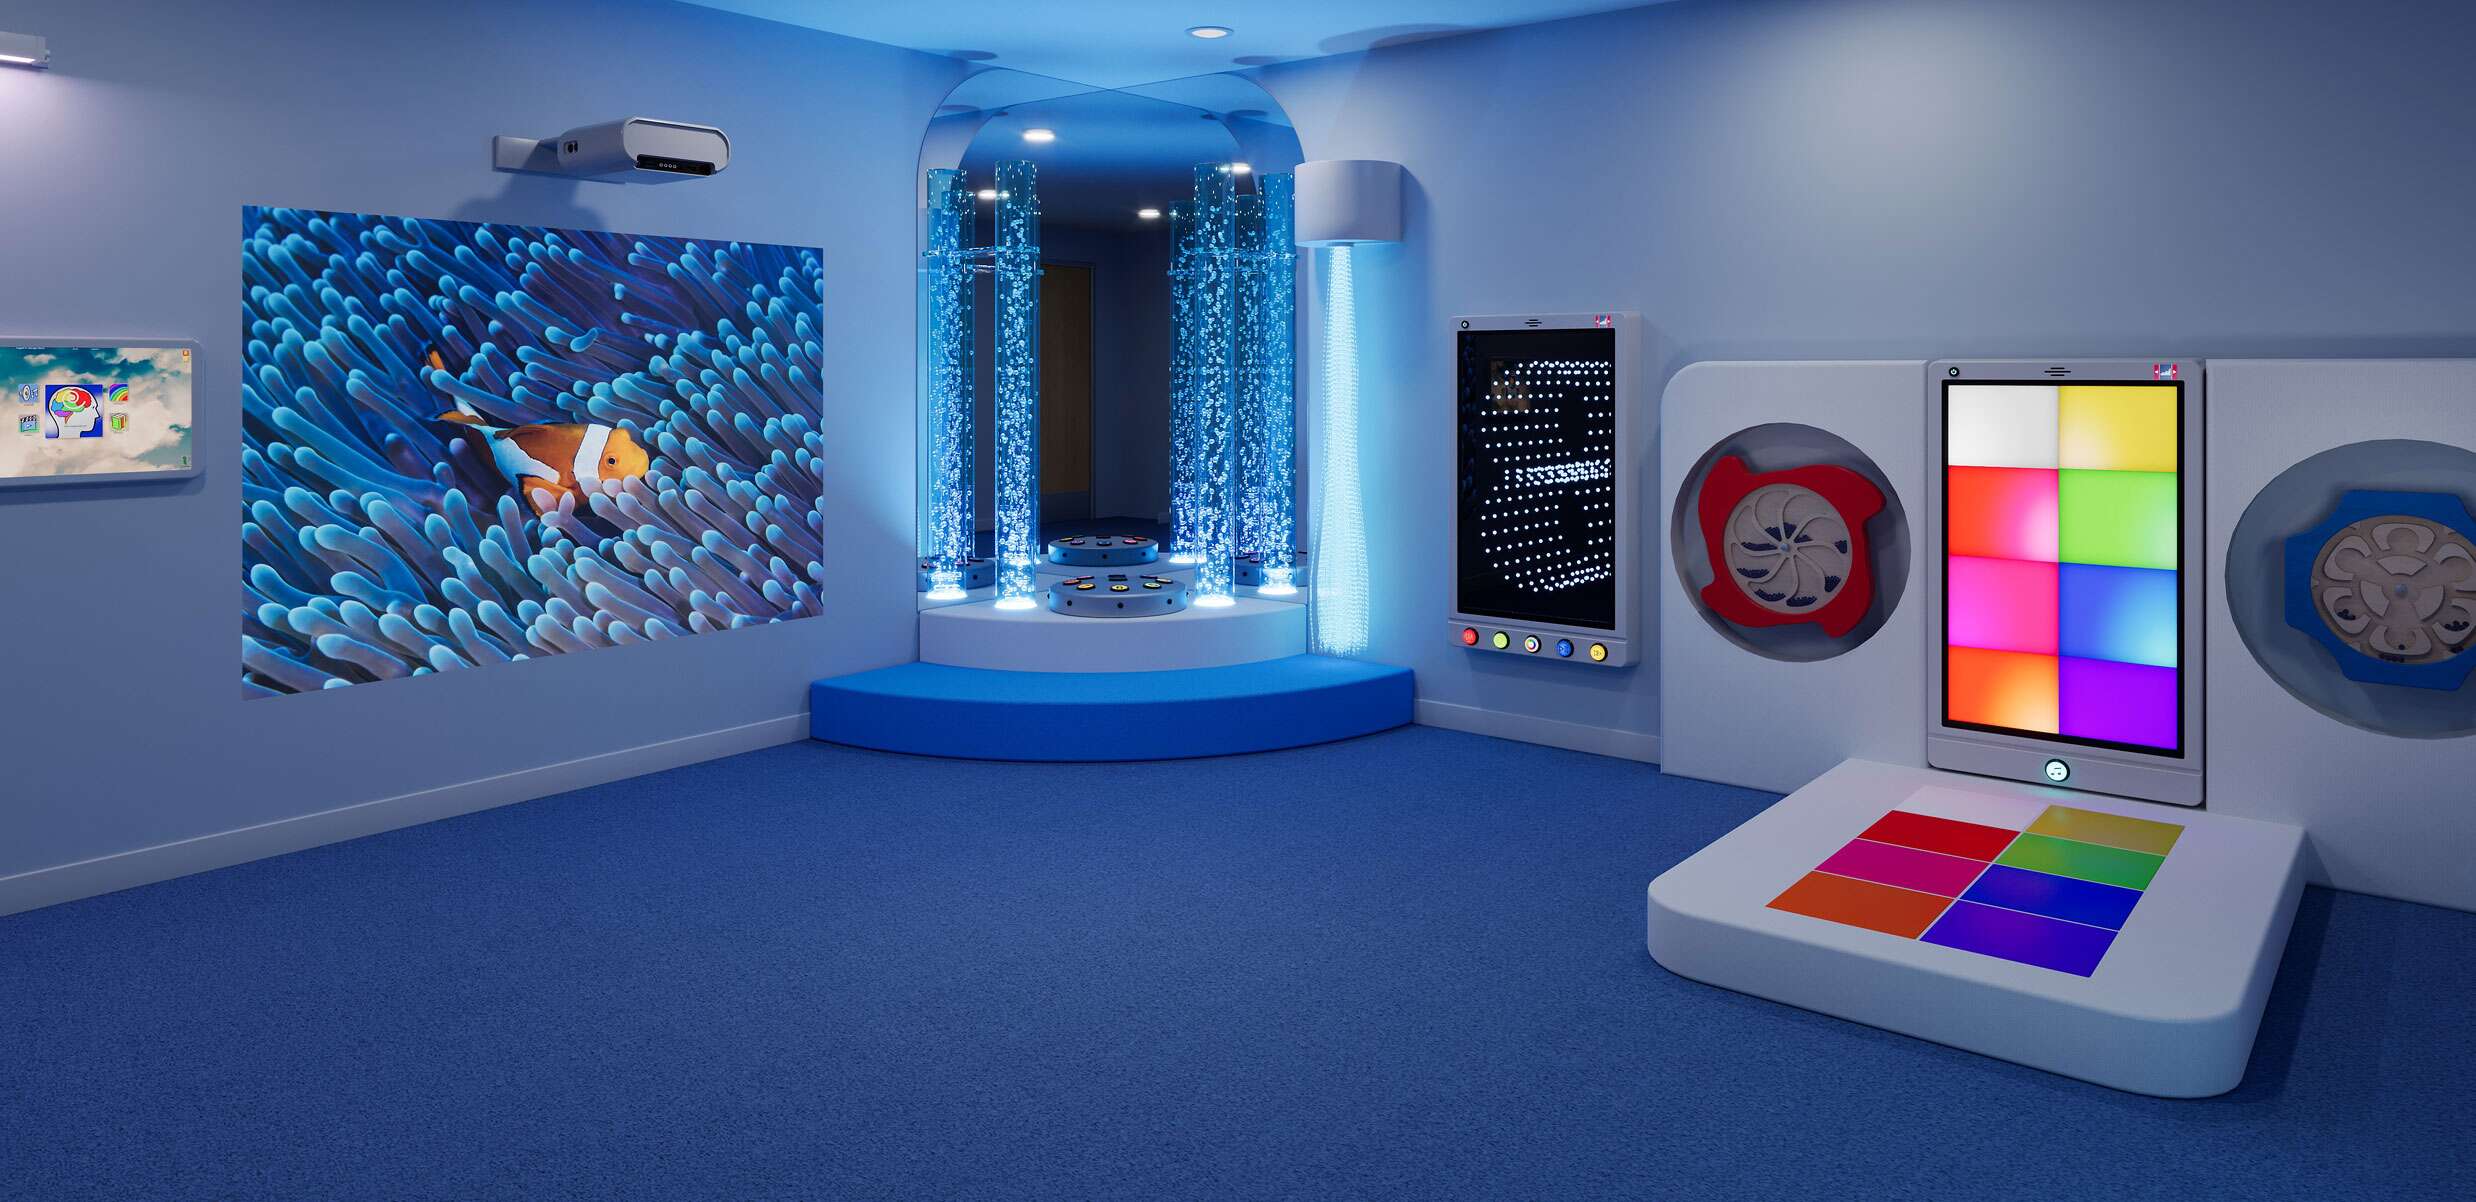 Sensory Room Equipment: Transforming Spaces with Loomini